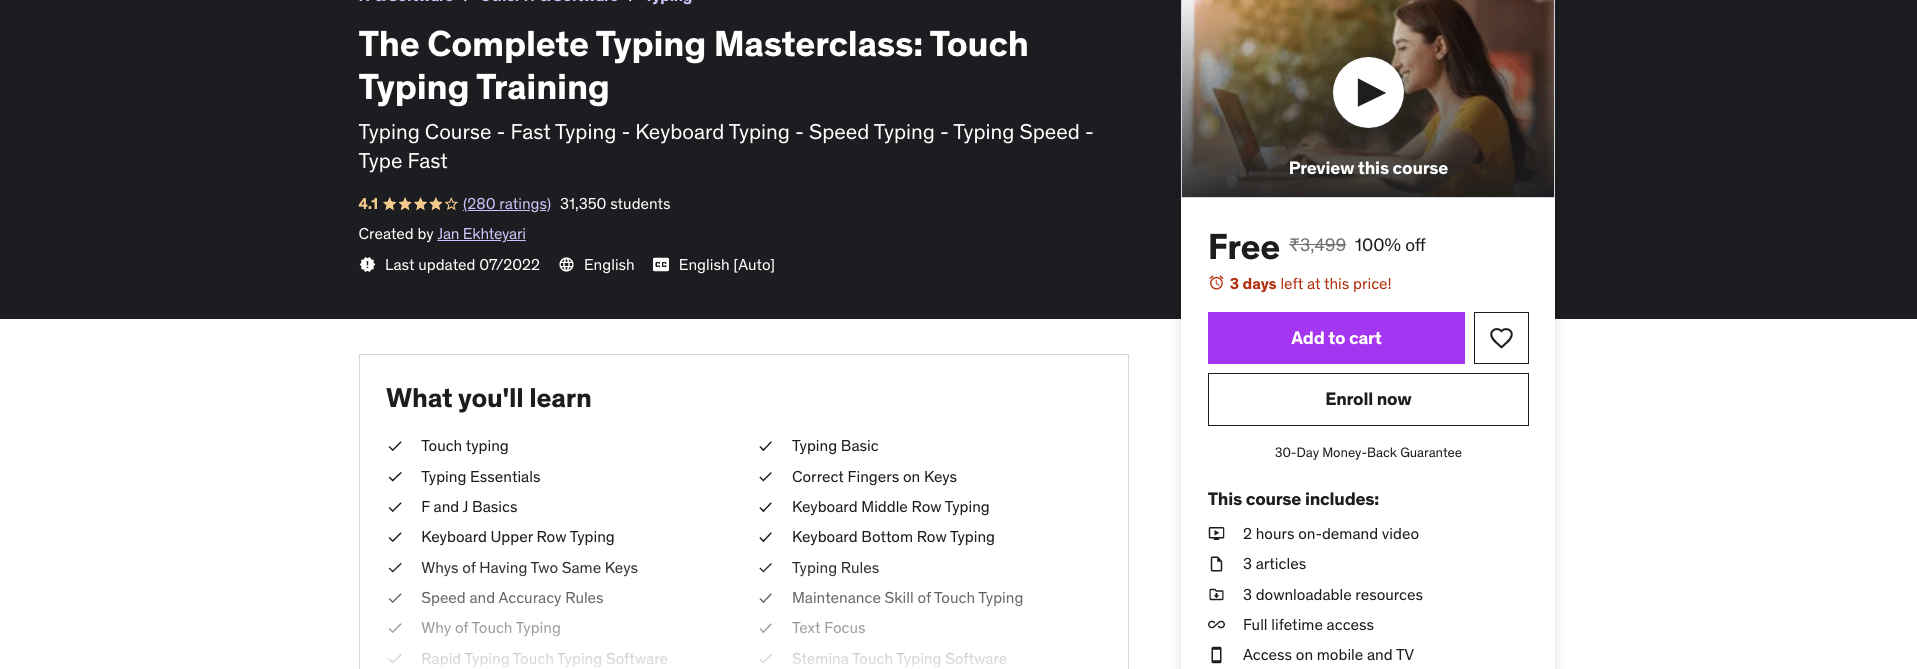 The Complete Typing Masterclass: Touch Typing Training